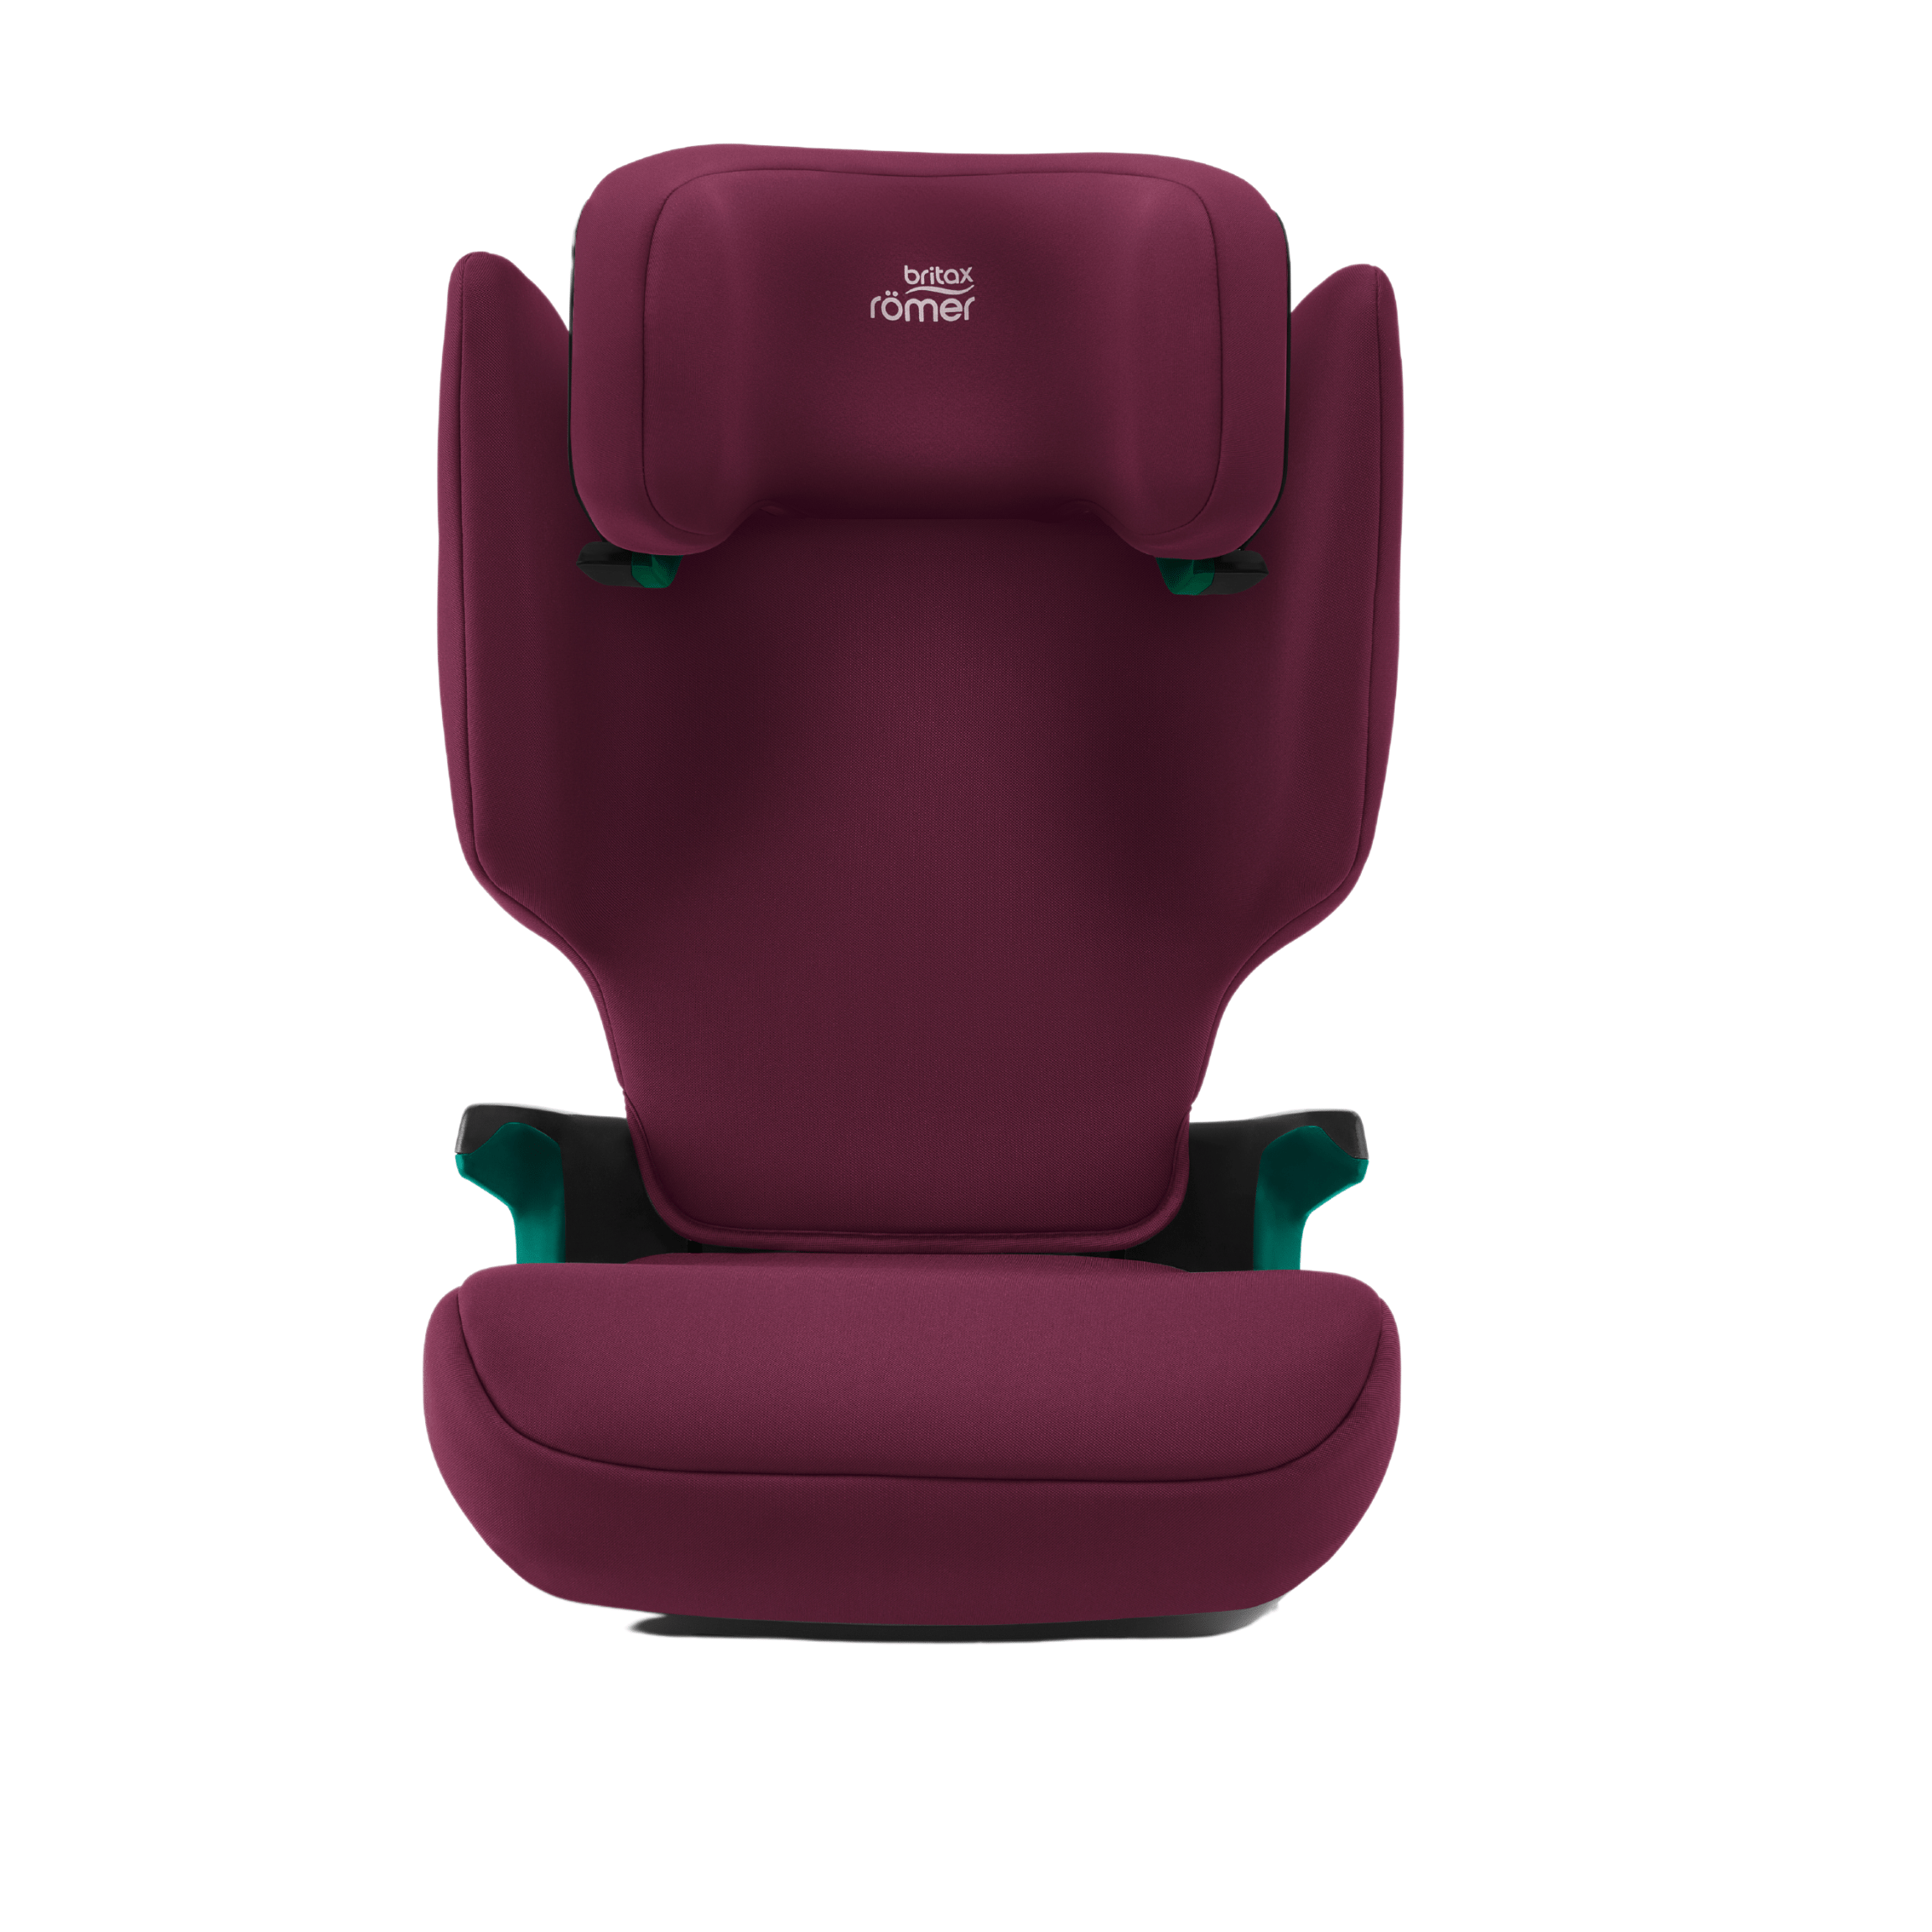 Britax Highback Booster Seats Britax DISCOVERY PLUS - Burgundy Red 2000036851